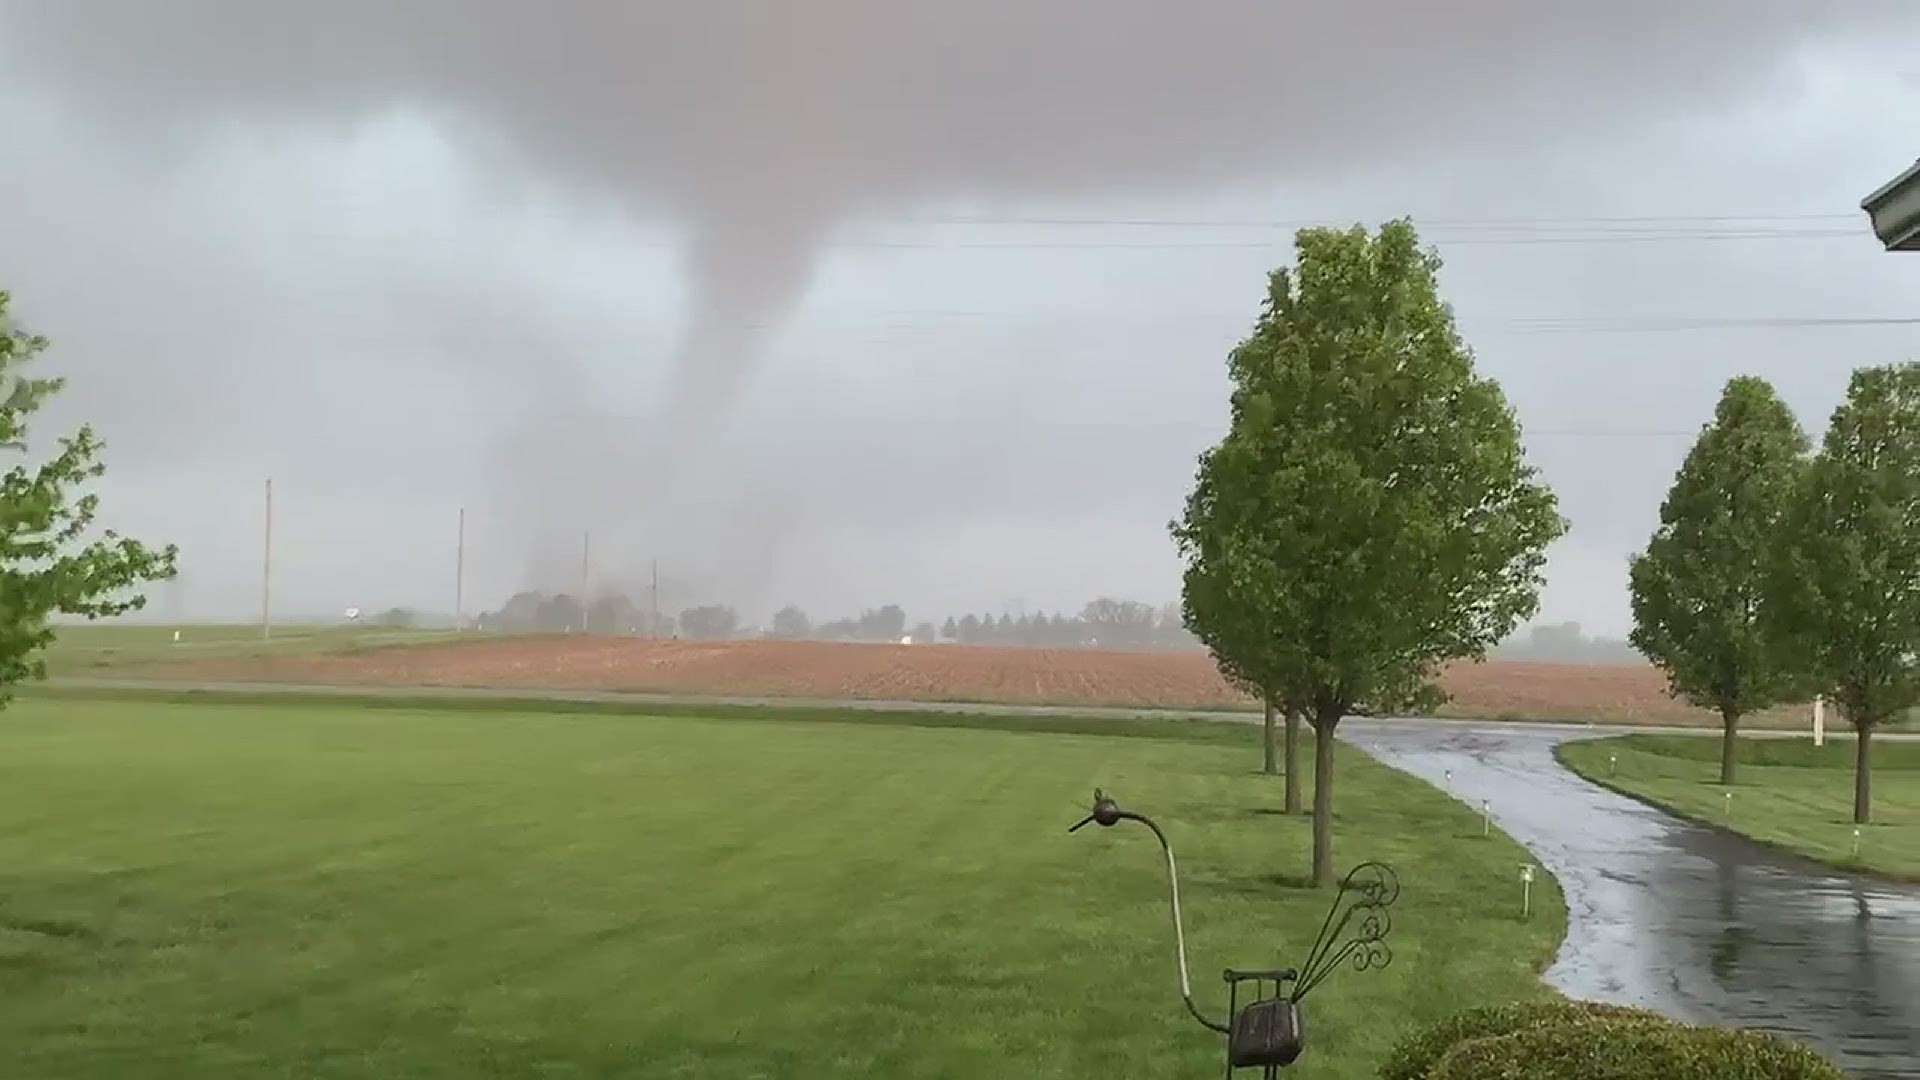 Tornado sighted by homeowners in London, Ohio